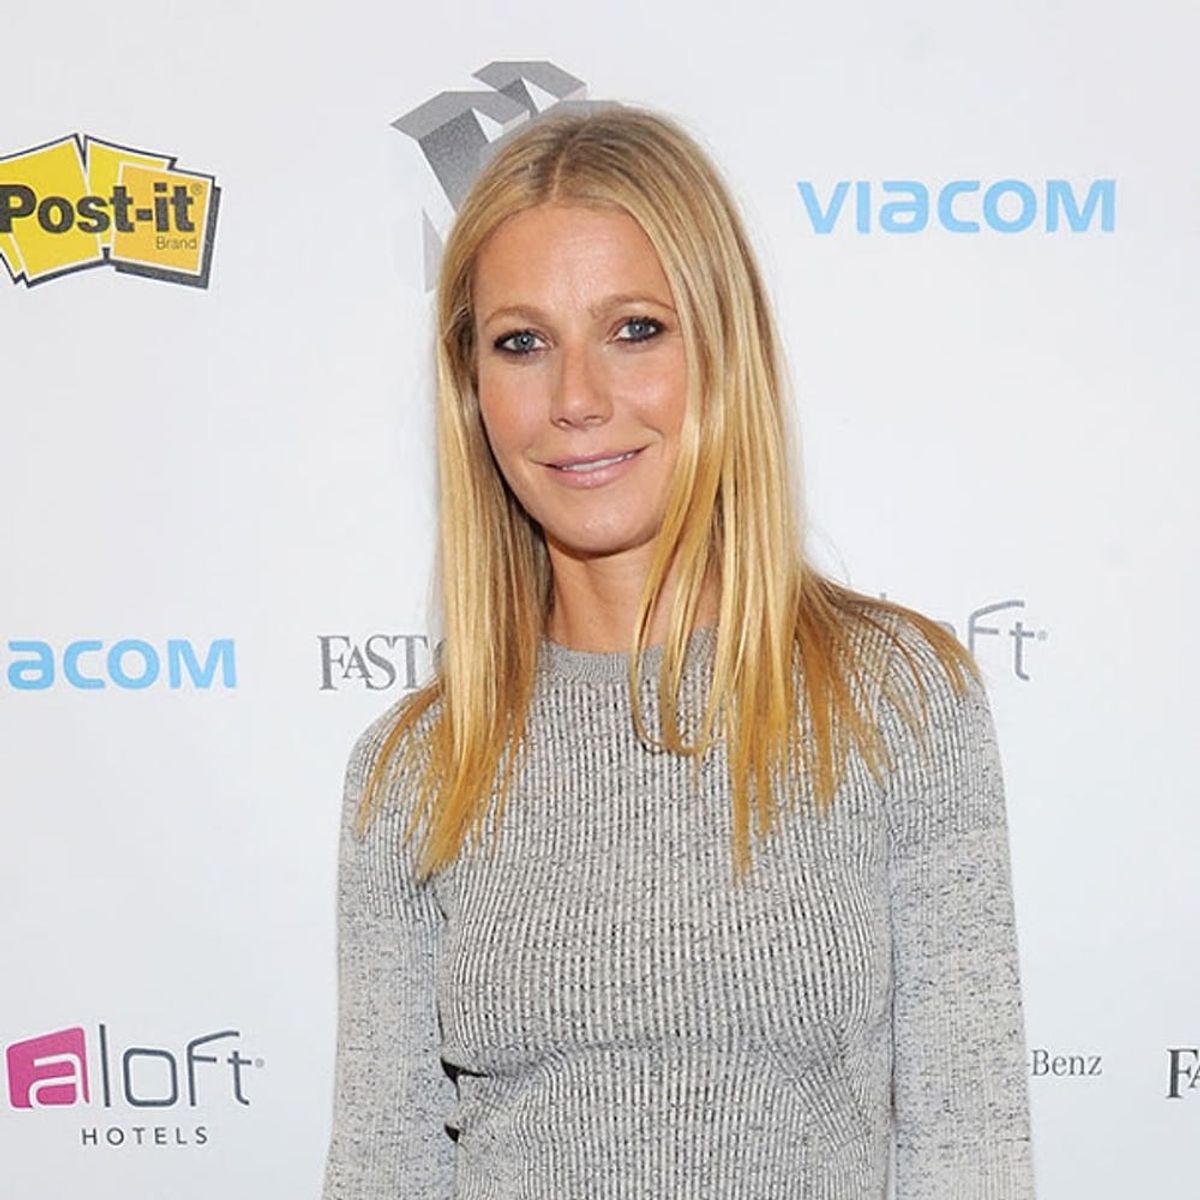 This Is *THE* Craziest ($90,000!) Item in Goop’s 2015 Holiday Gift Guides